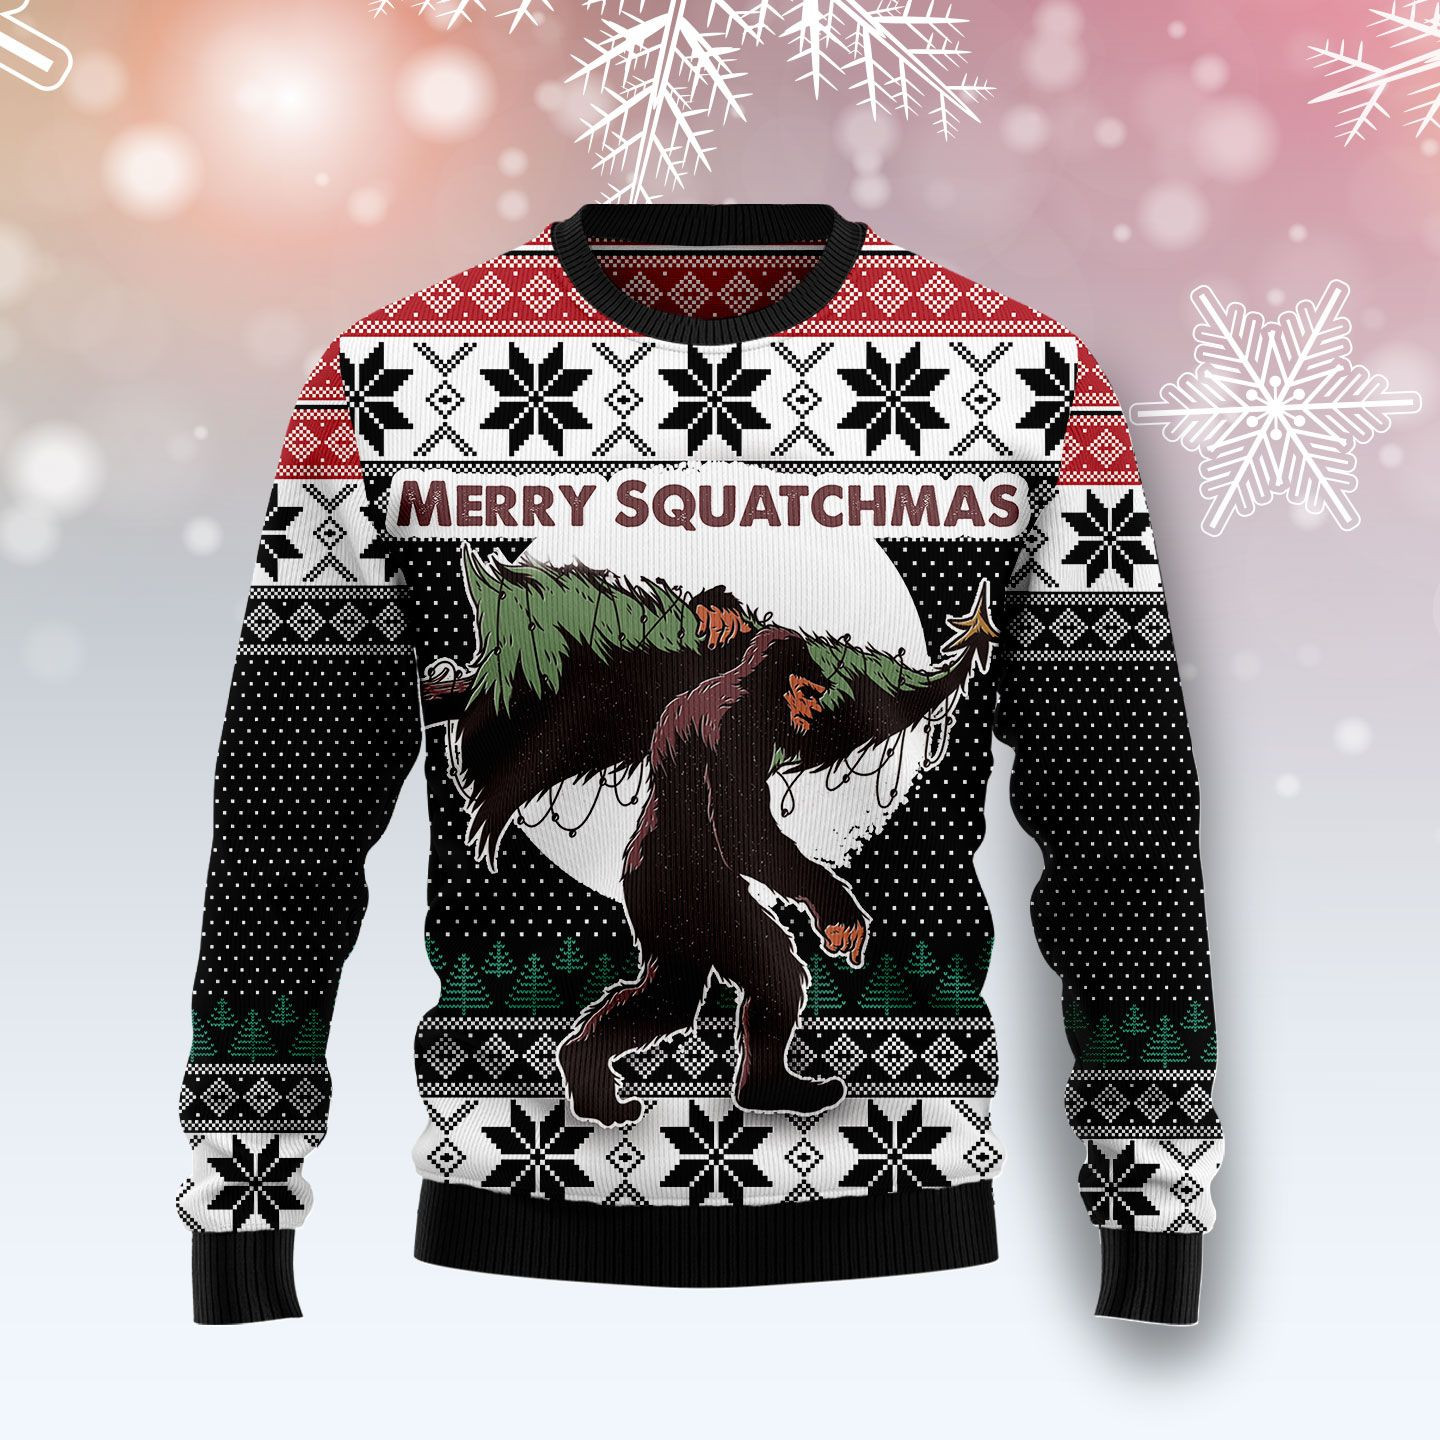 Bigfoot Squatchmas Ugly Christmas Sweater Ugly Sweater For Men Women, Holiday Sweater